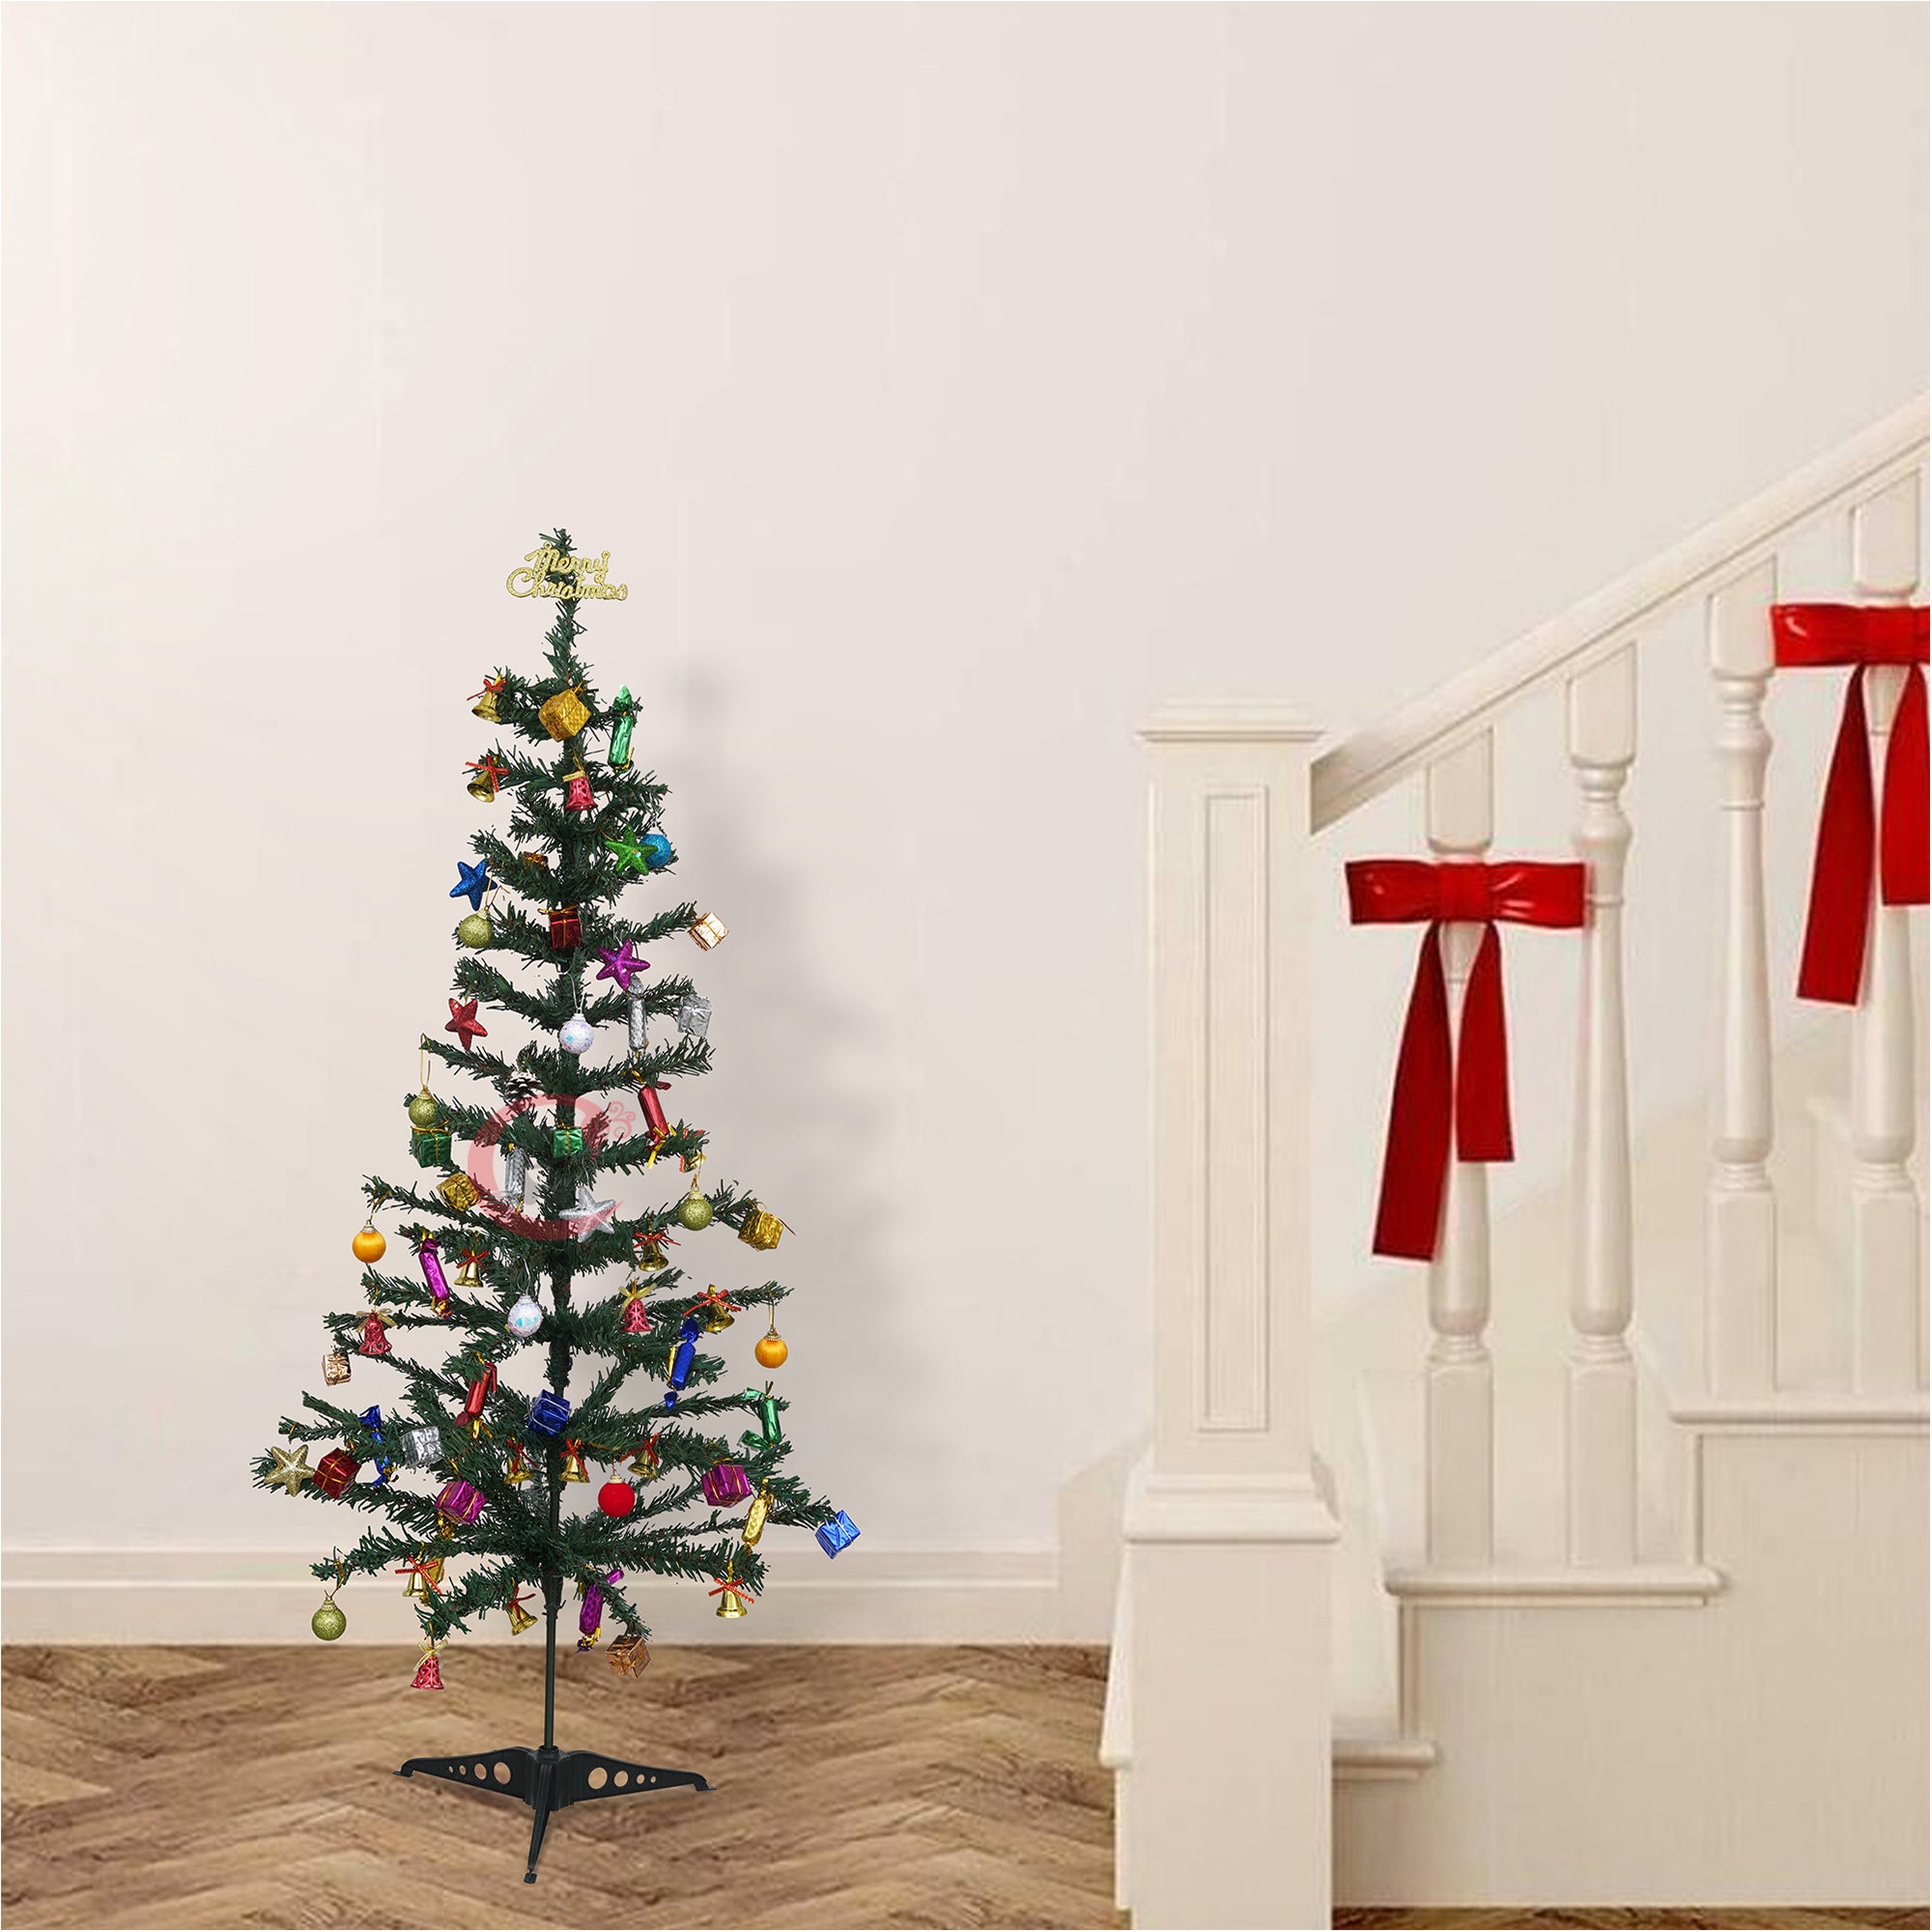 eCraftIndia 3 Feet Green Artificial Christmas Tree Xmas Pine Tree with Metal Stand - Xmas Tree for Indoor, Outdoor, Home, Living Room, Office, Church Decor - Merry Christmas Decoration Item 7